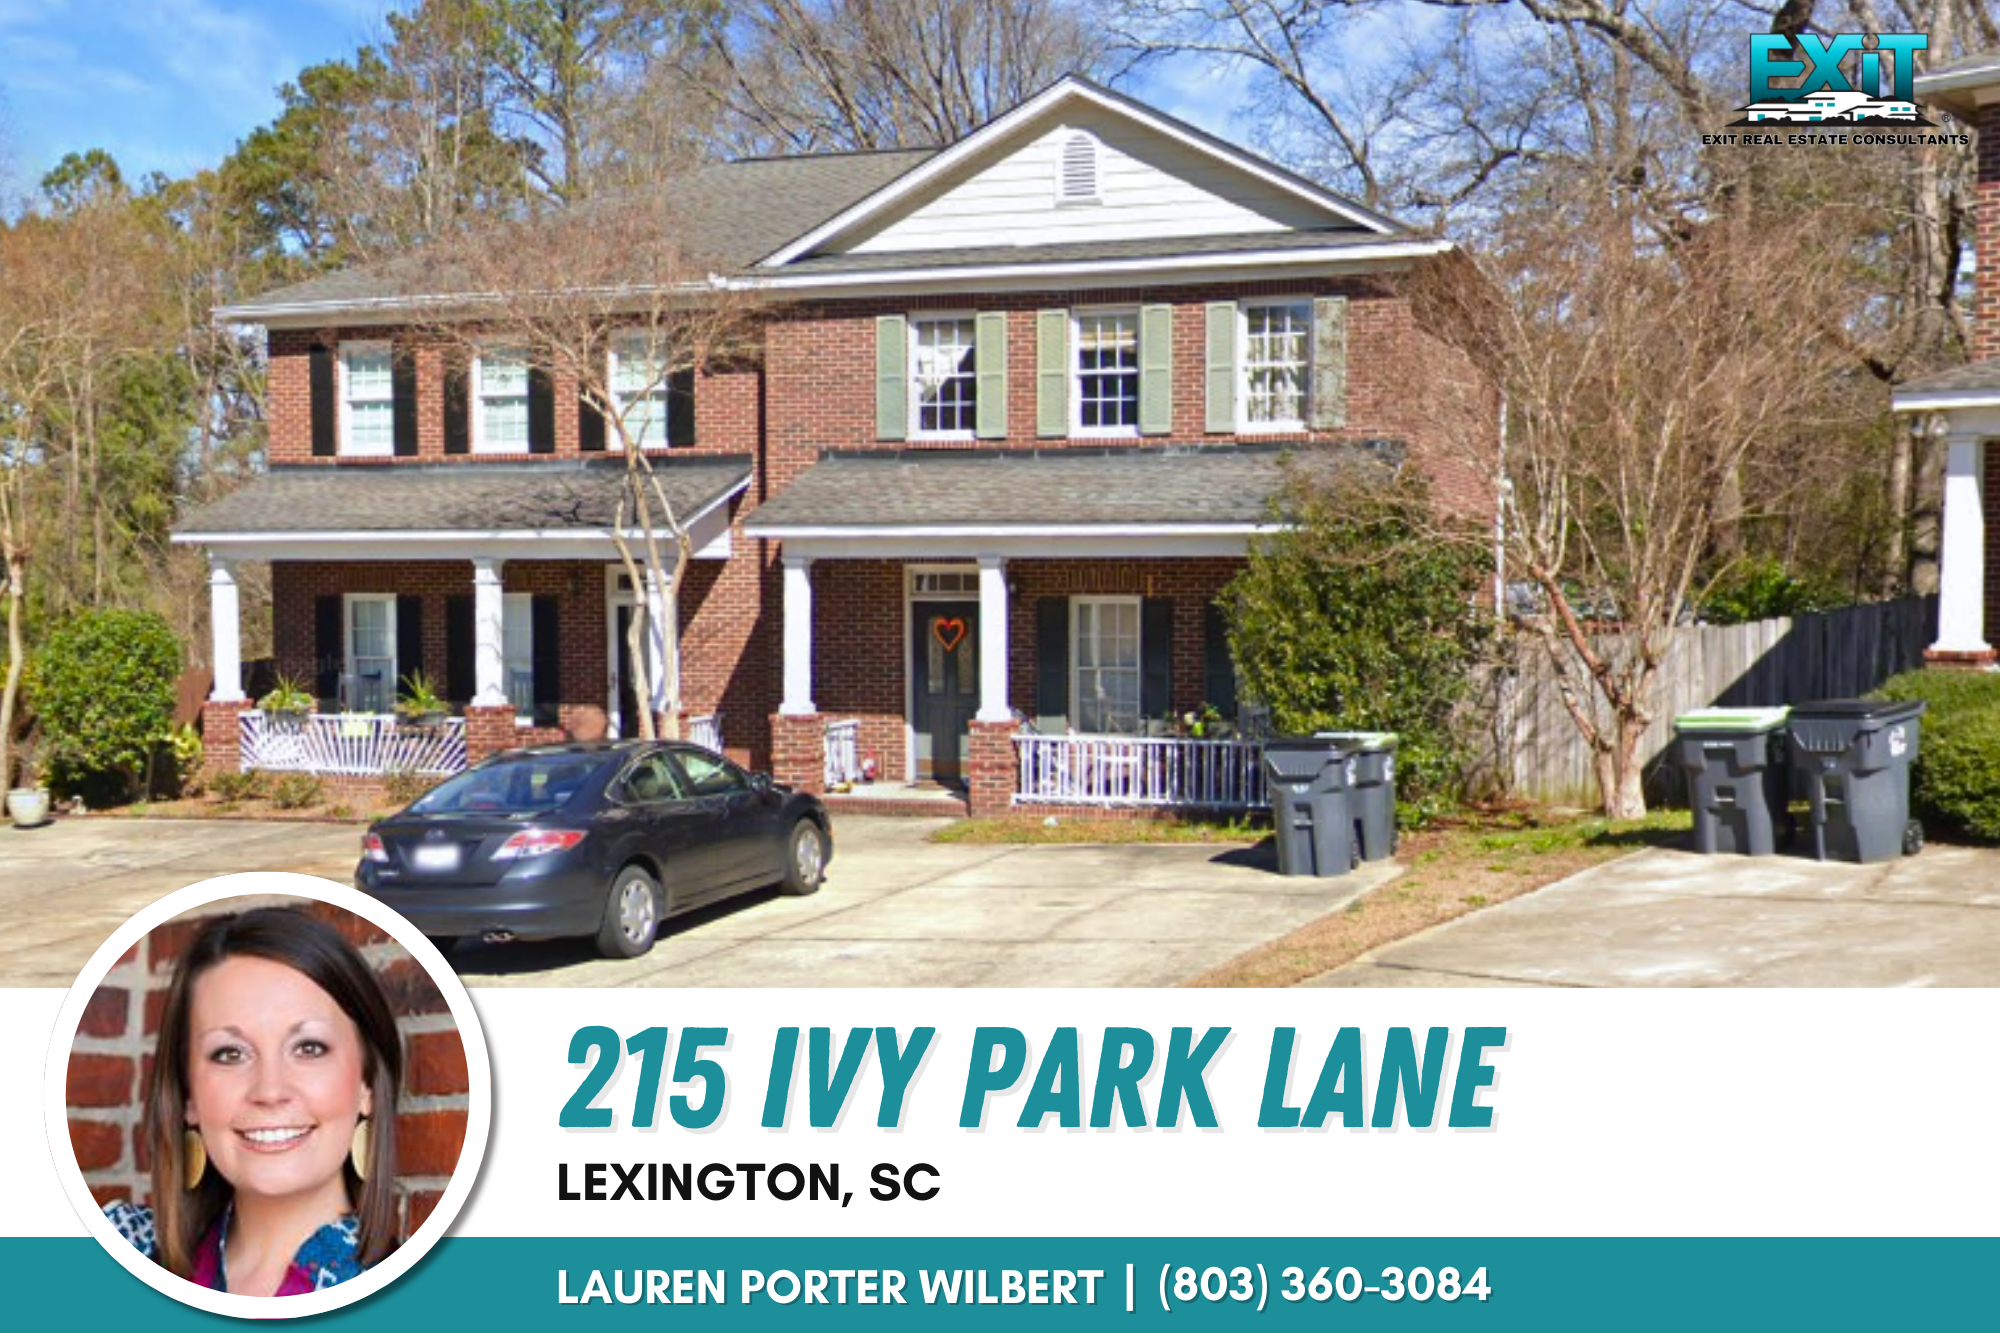 Just listed in Ivy Park